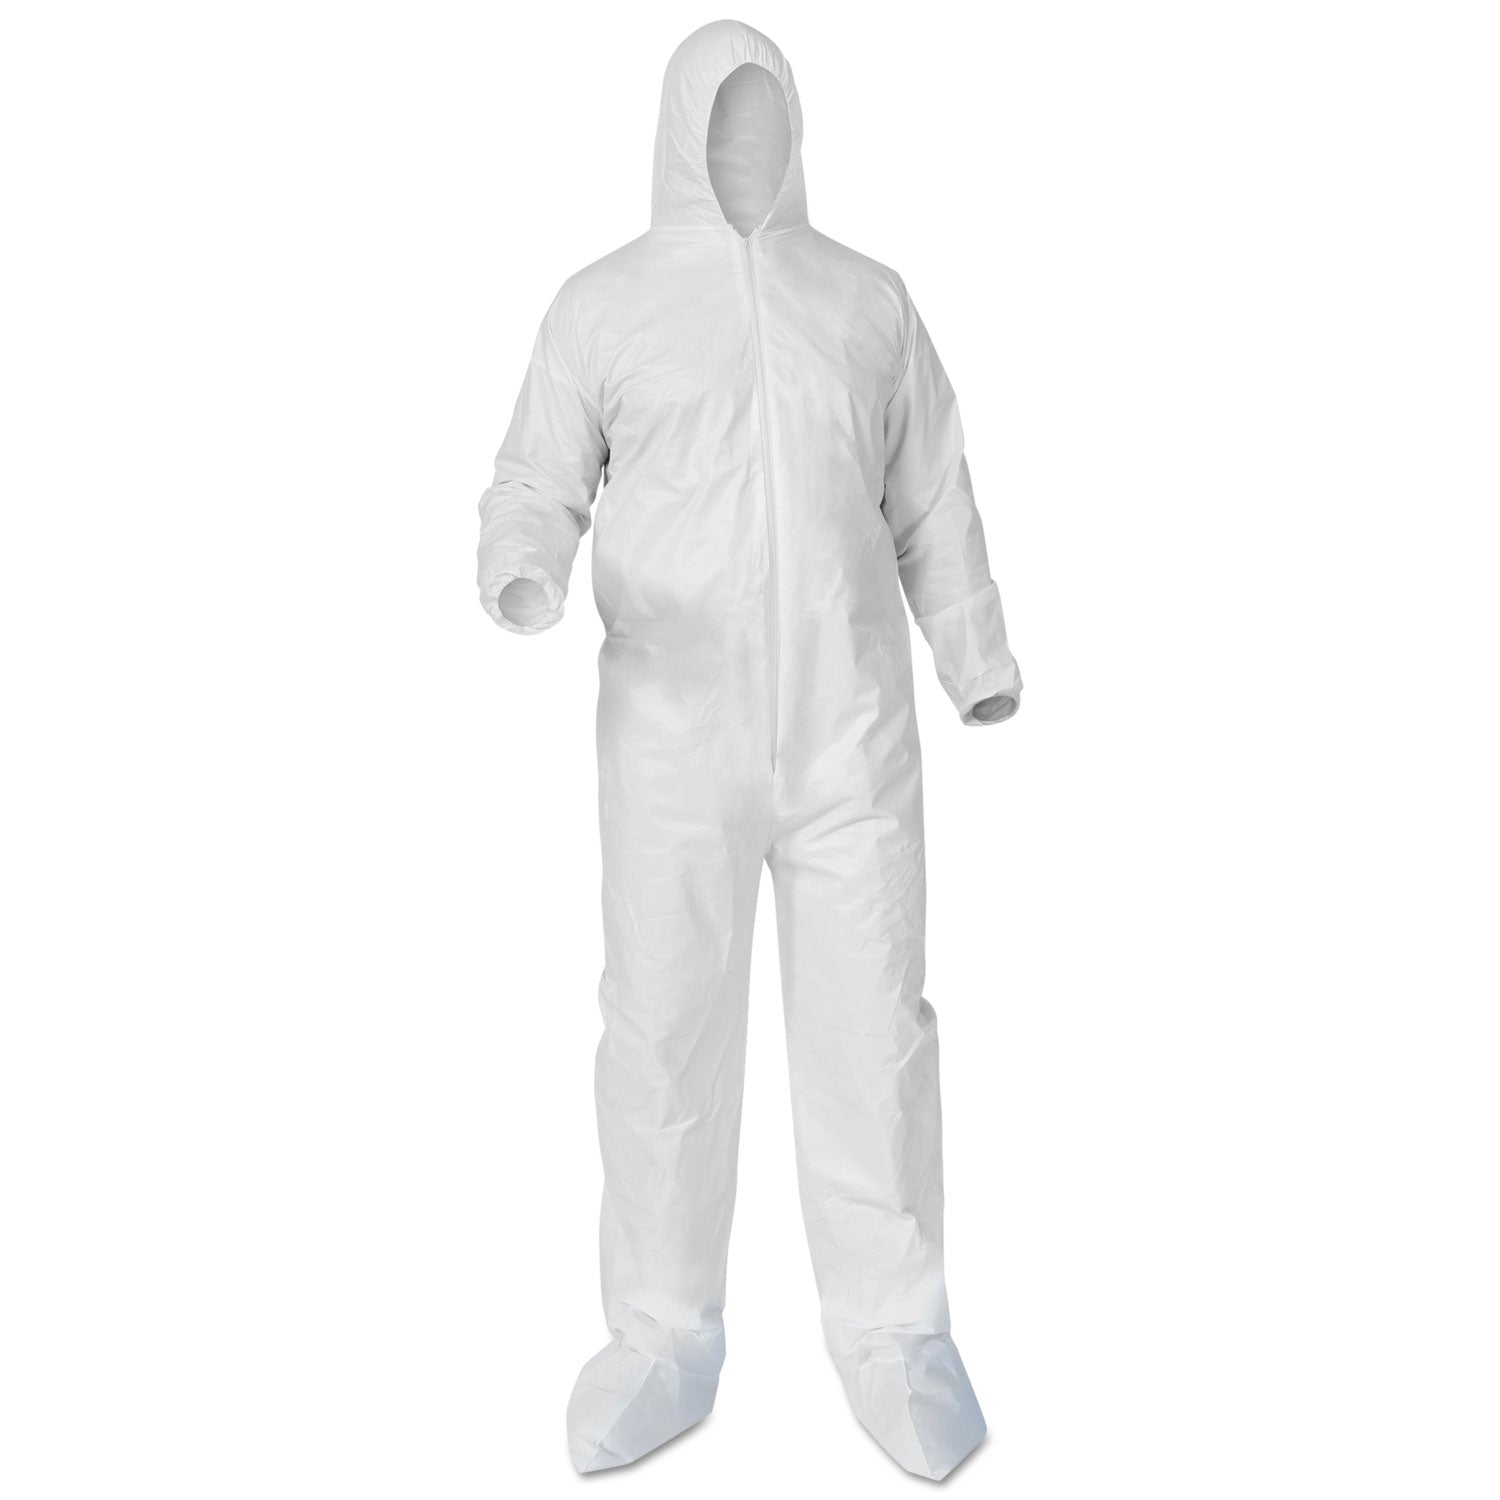 a35-liquid-and-particle-protection-coveralls-zipper-front-hood-boots-elastic-wrists-ankles-4x-large-white-25-carton_kcc38953 - 1